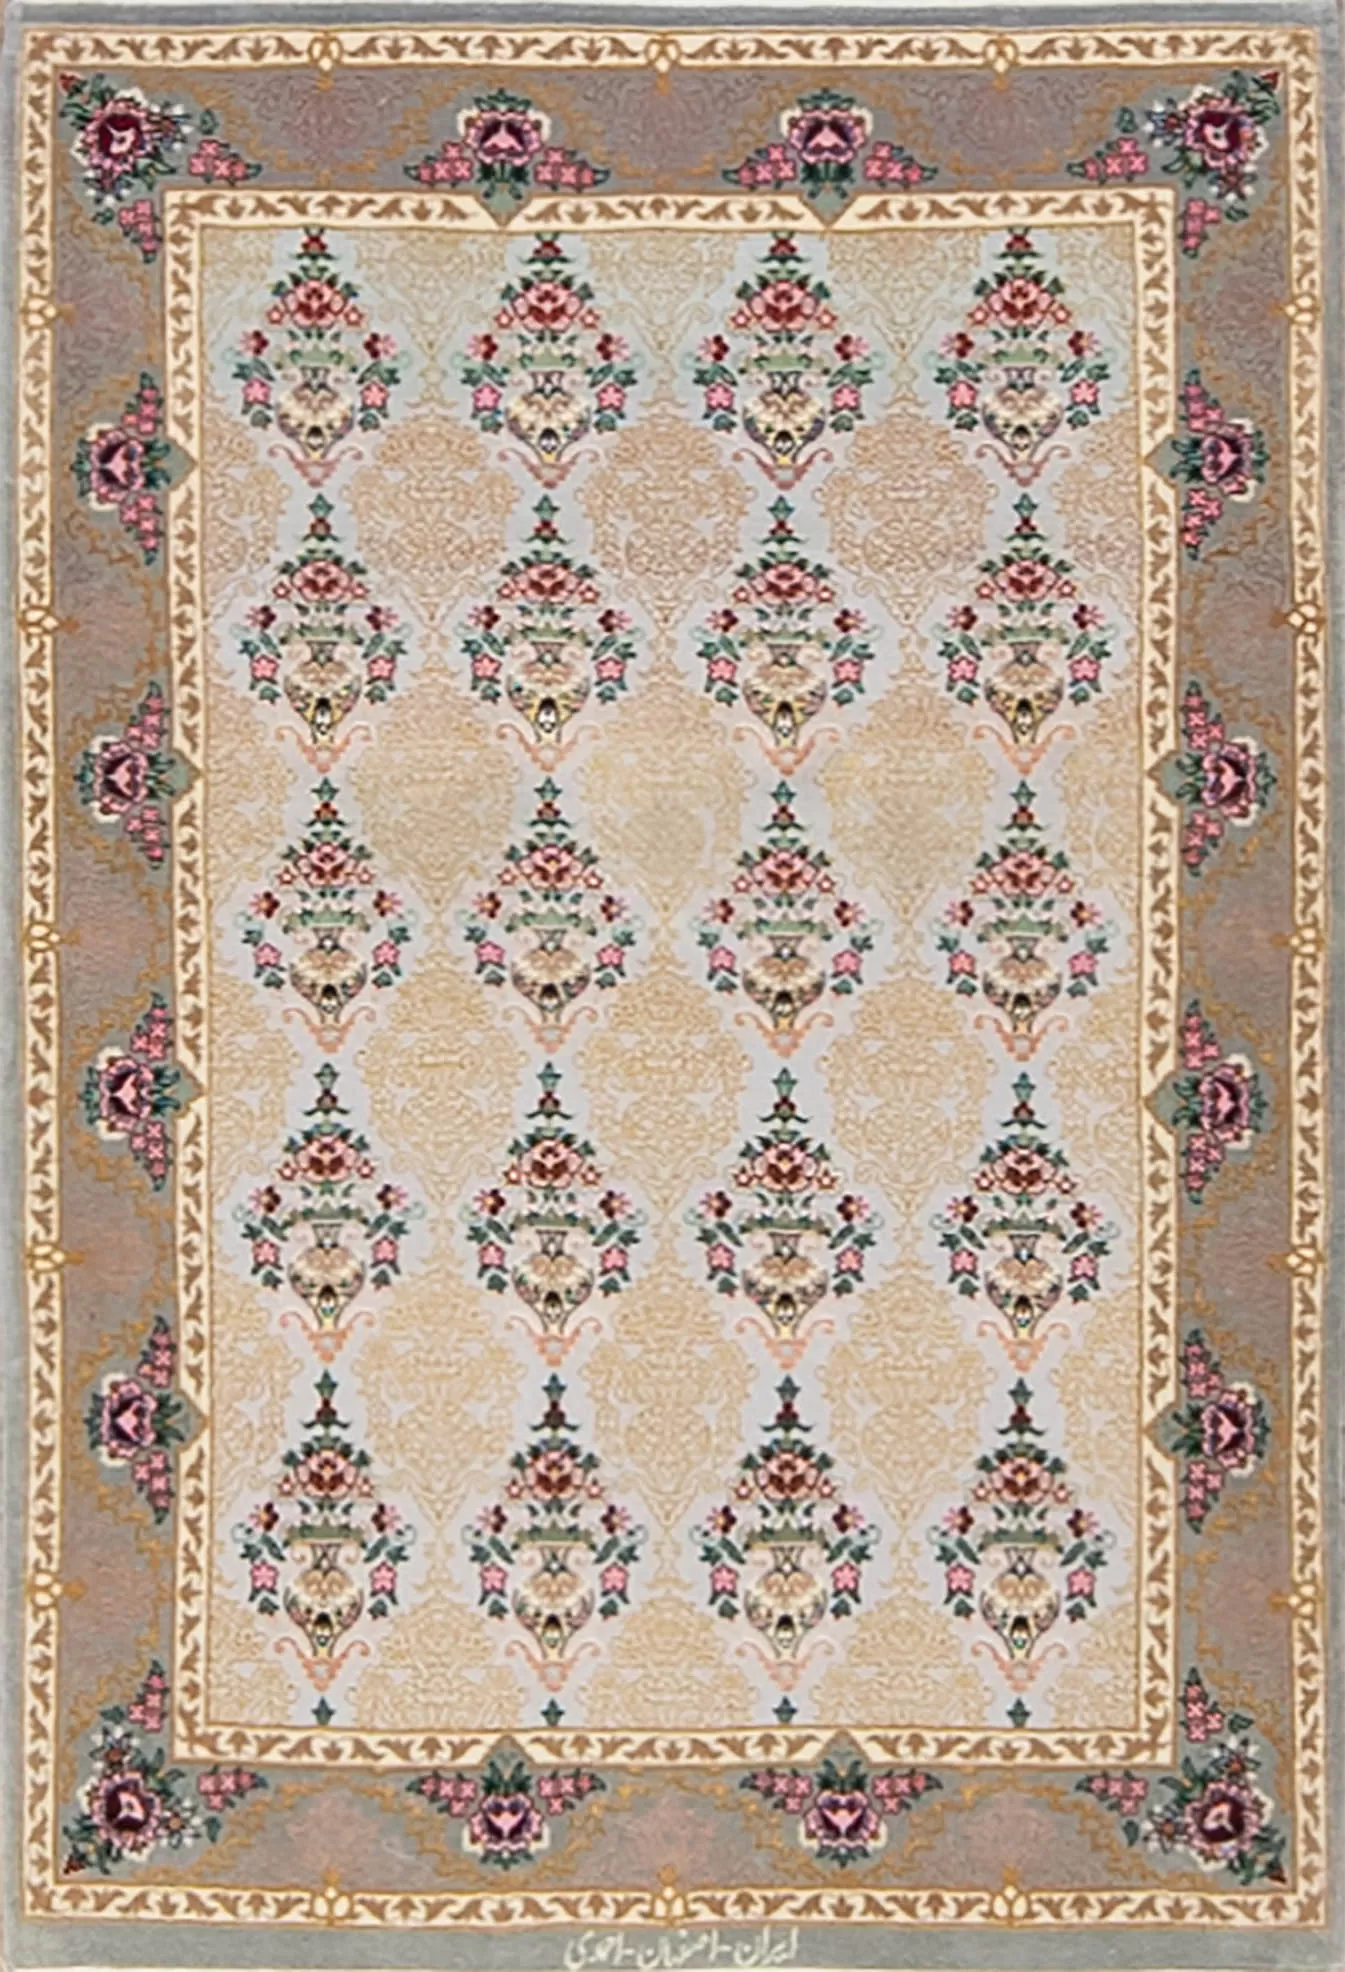 Hand woven floral Persian Isfahan rug, multicolored all-over design rug. Size 2.9x4.6.